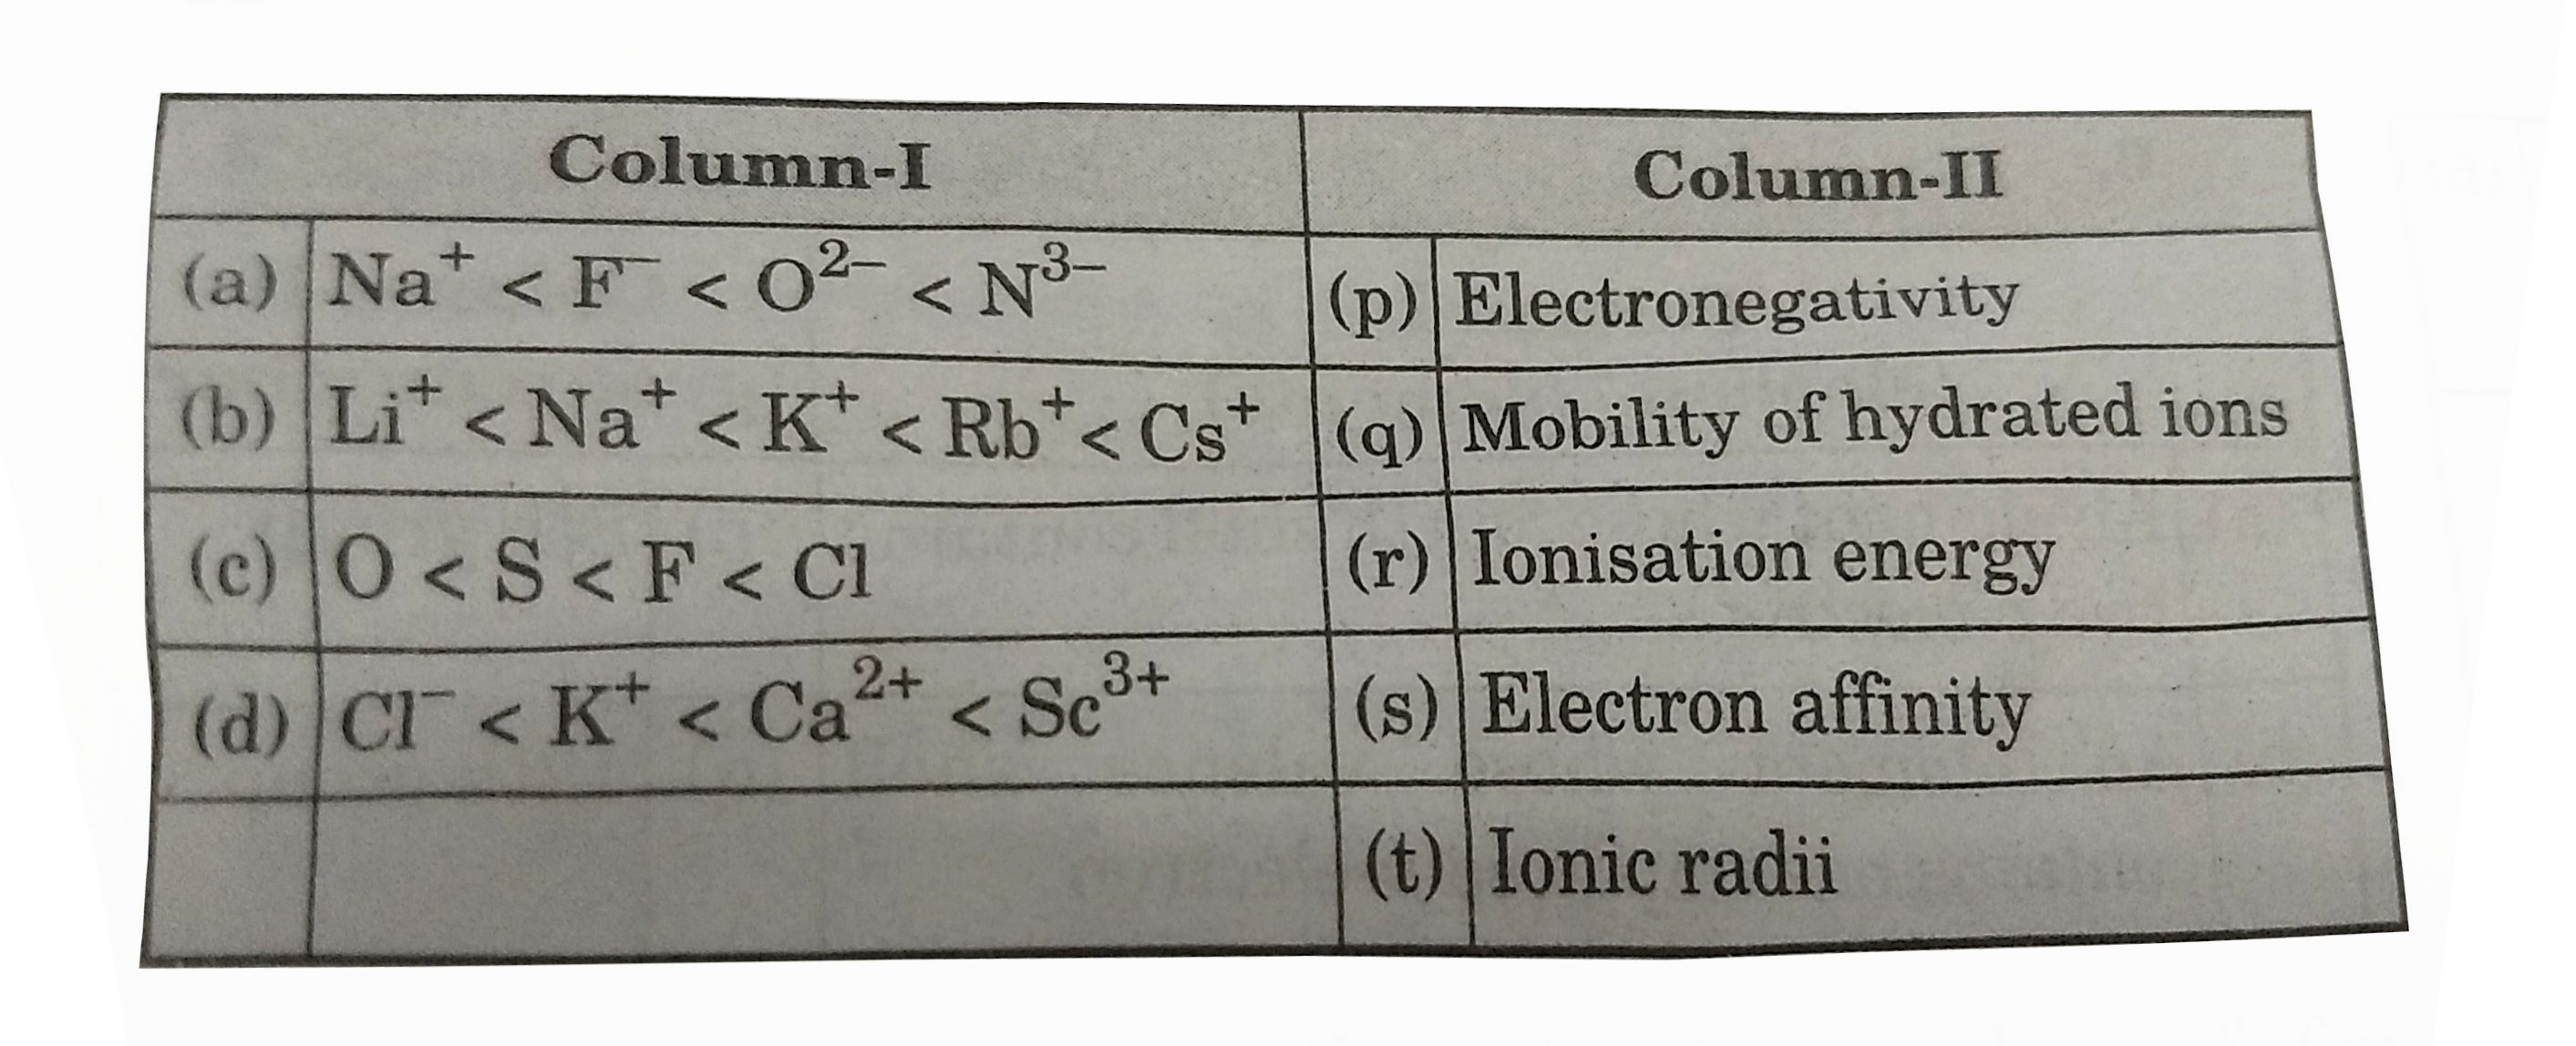 Column-I contains some increasing orders of various species and column-II has the properties of the elements/ions.